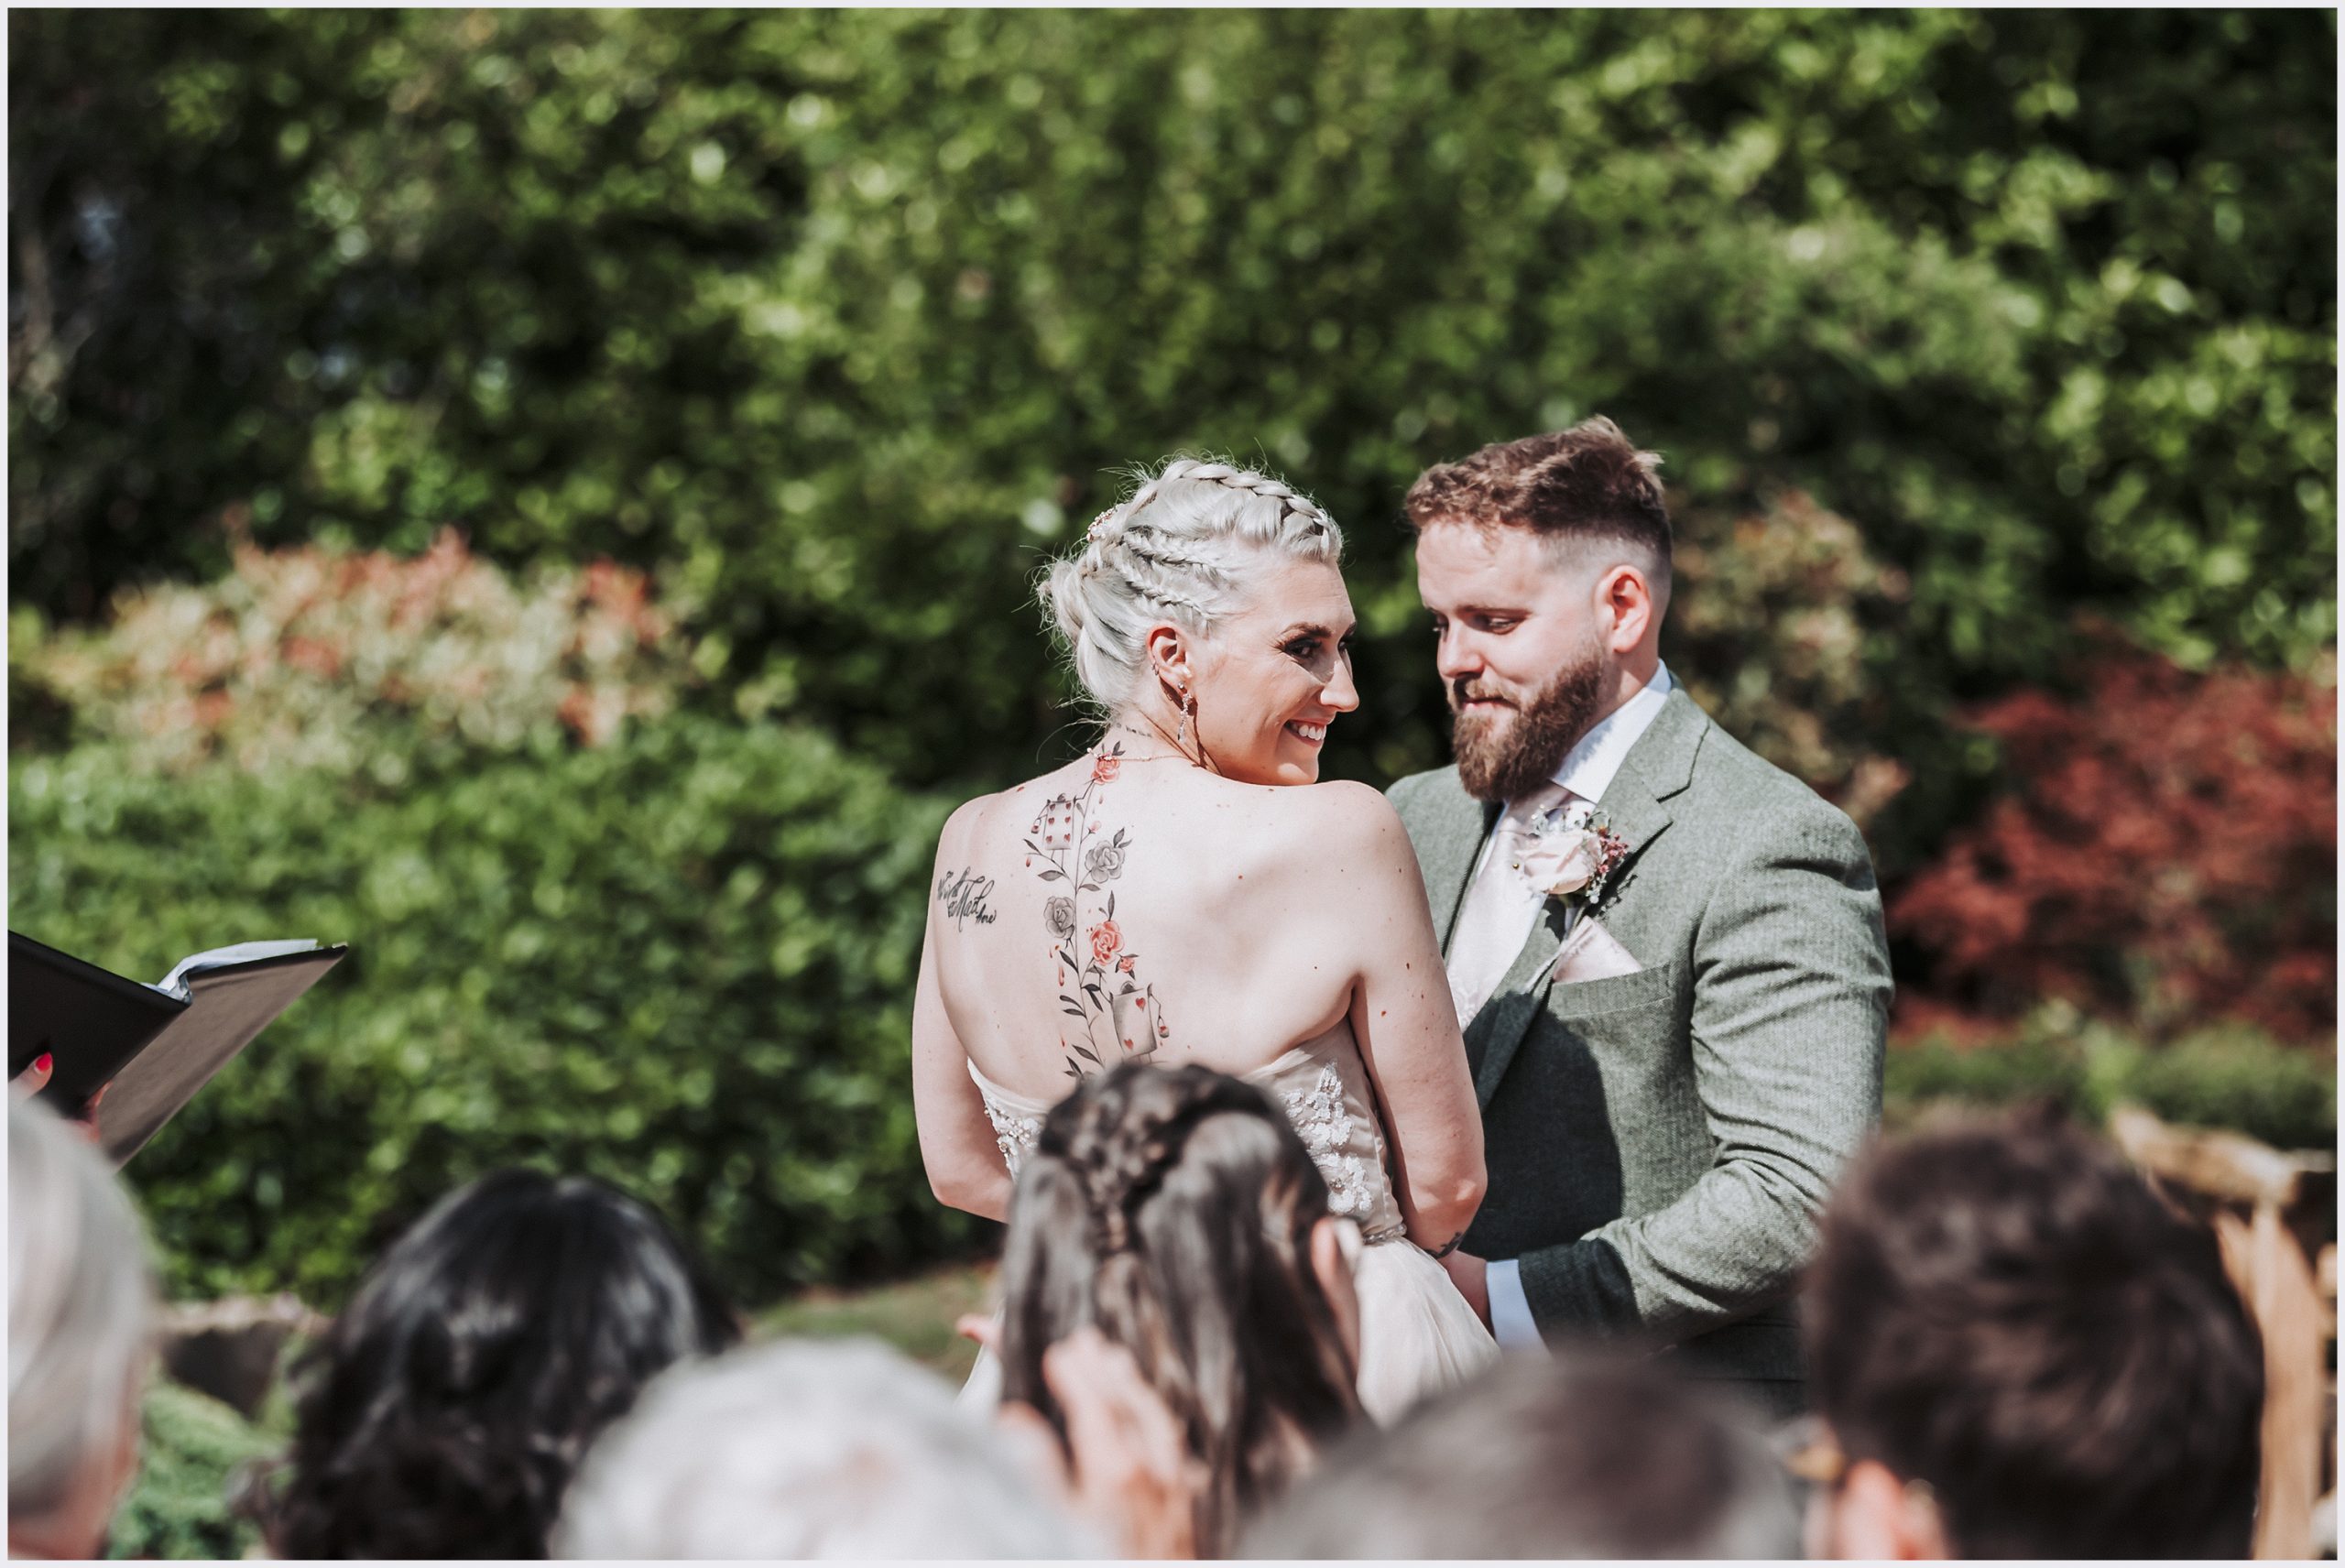 A bride turning round to smile at her guests during her outdoor wedding ceremony at The Grosvenor Pulford Hotel and Spa.  Image captured by helena Jayne Photorgaphy, Grosvenor Pulford wedding photographer